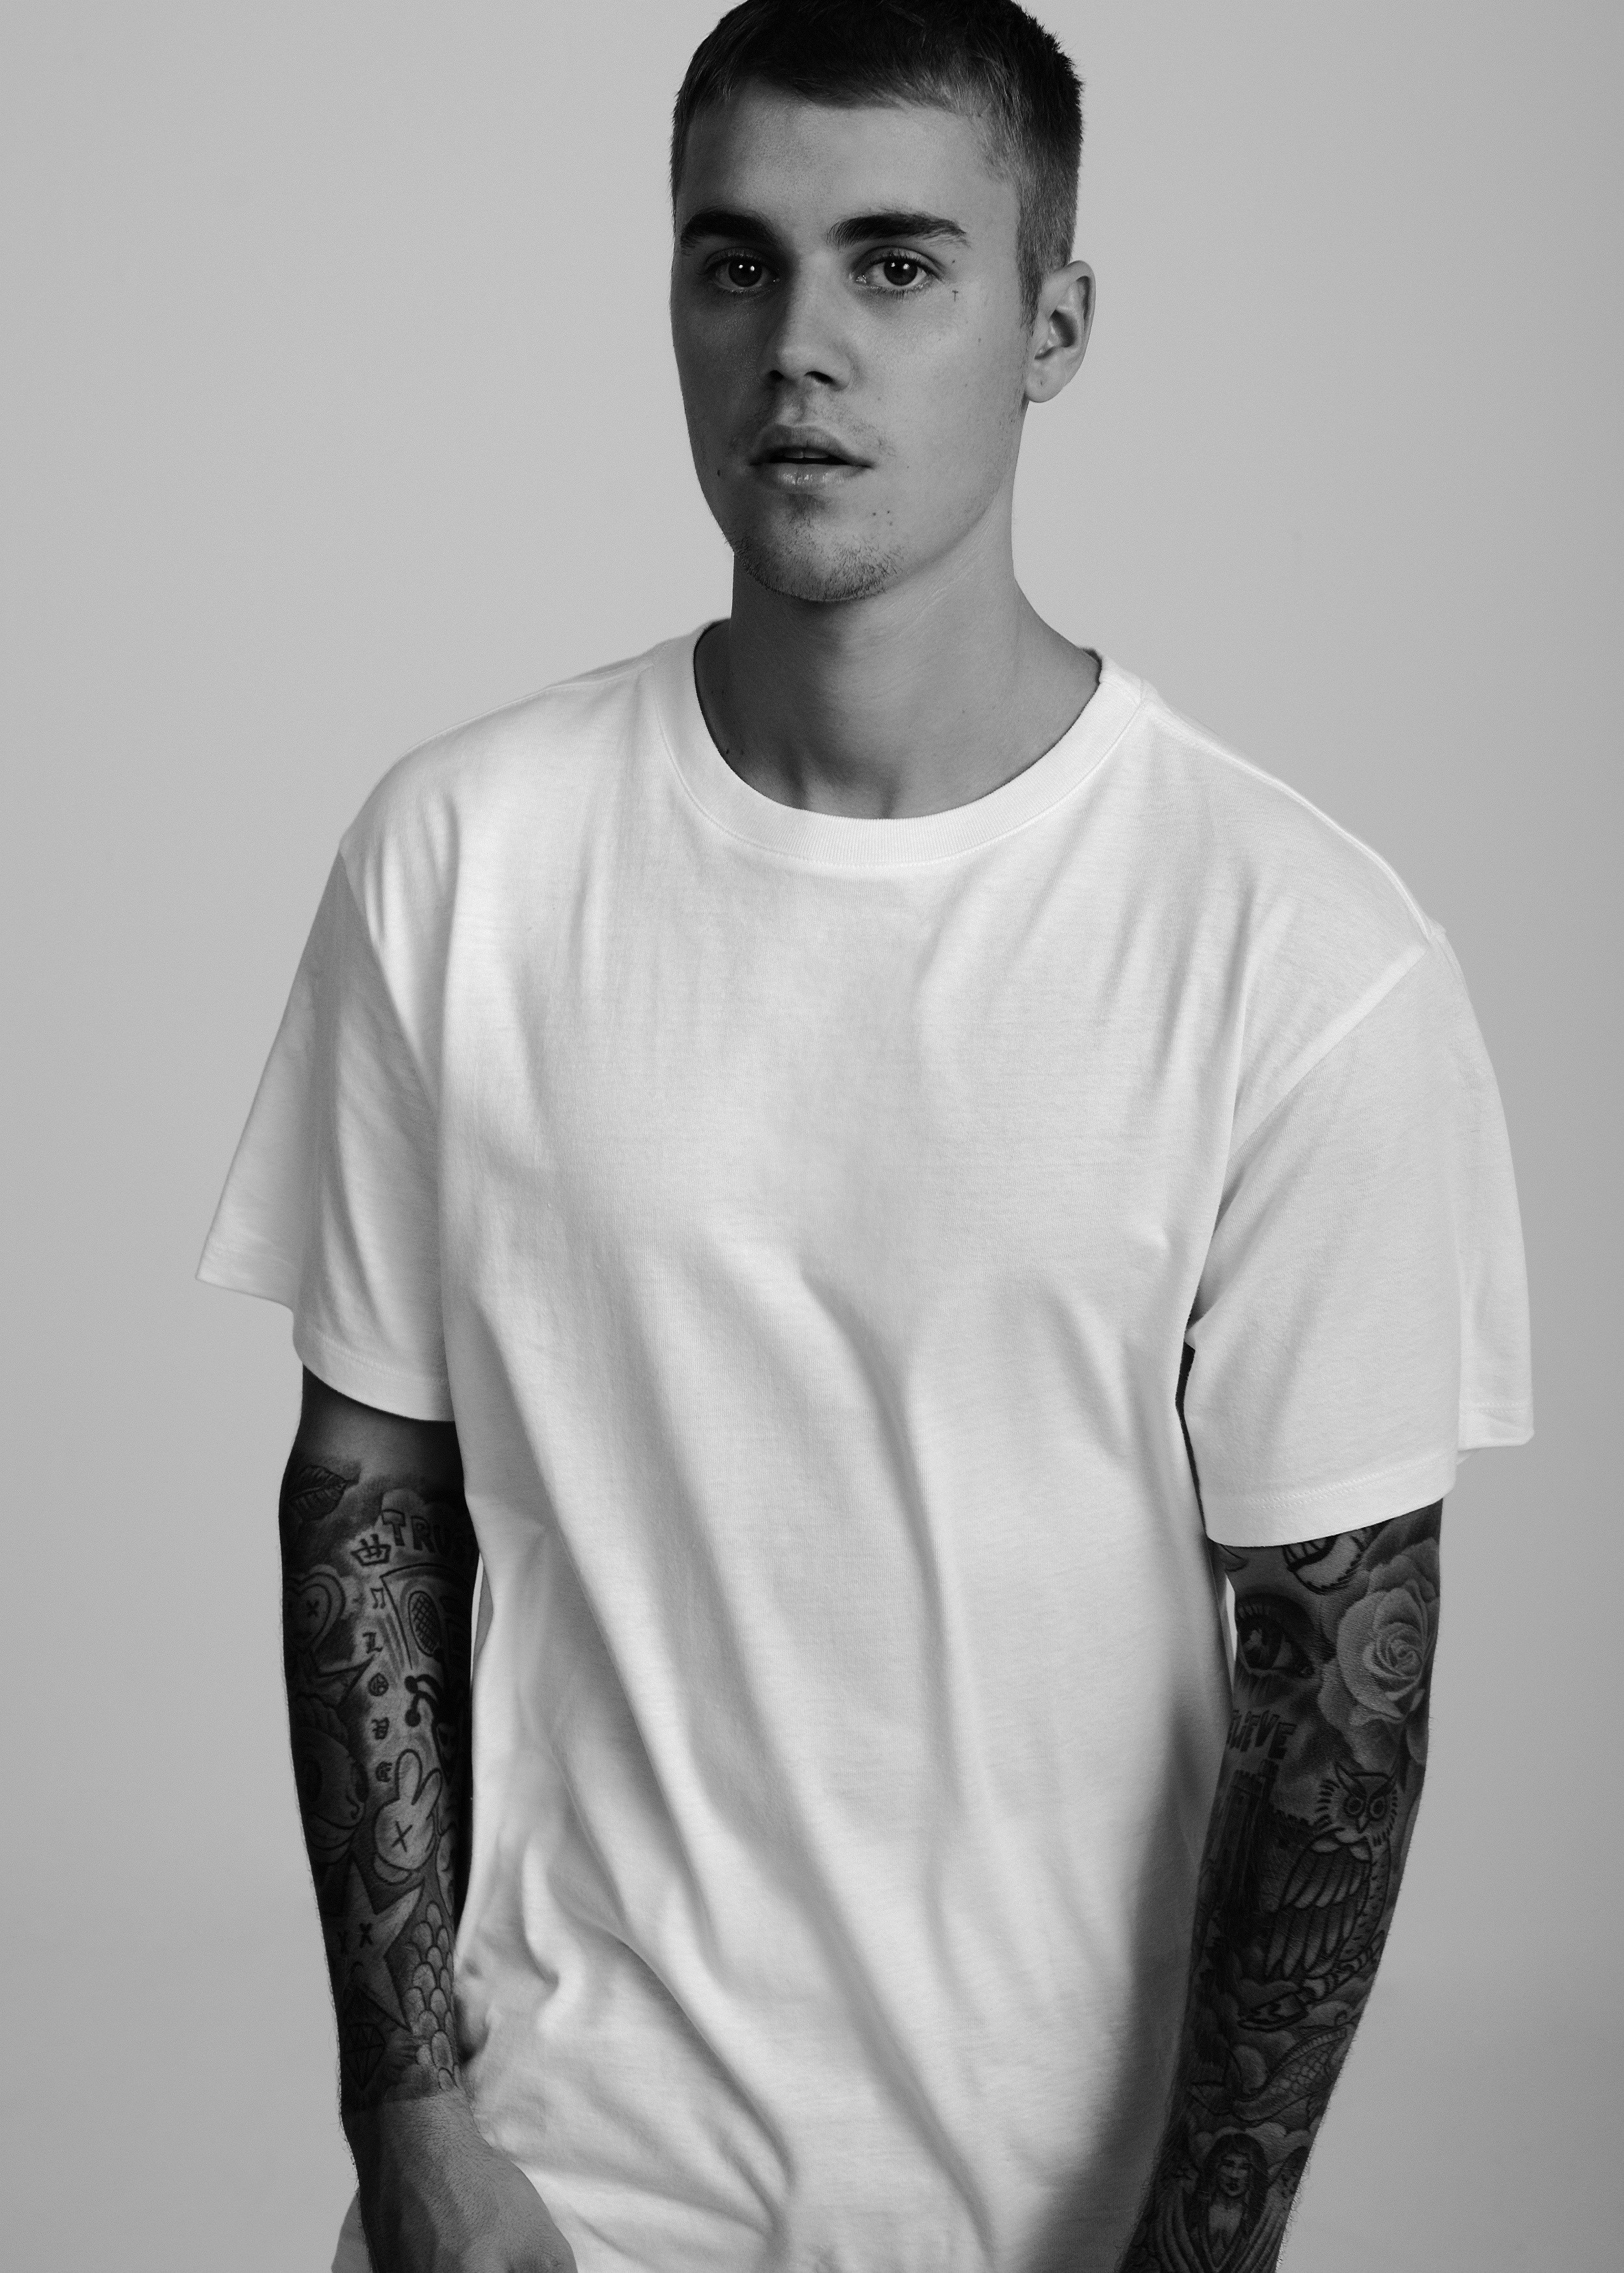 Perle vokal stempel You can now own a white T-shirt inspired by Justin Bieber | South China  Morning Post